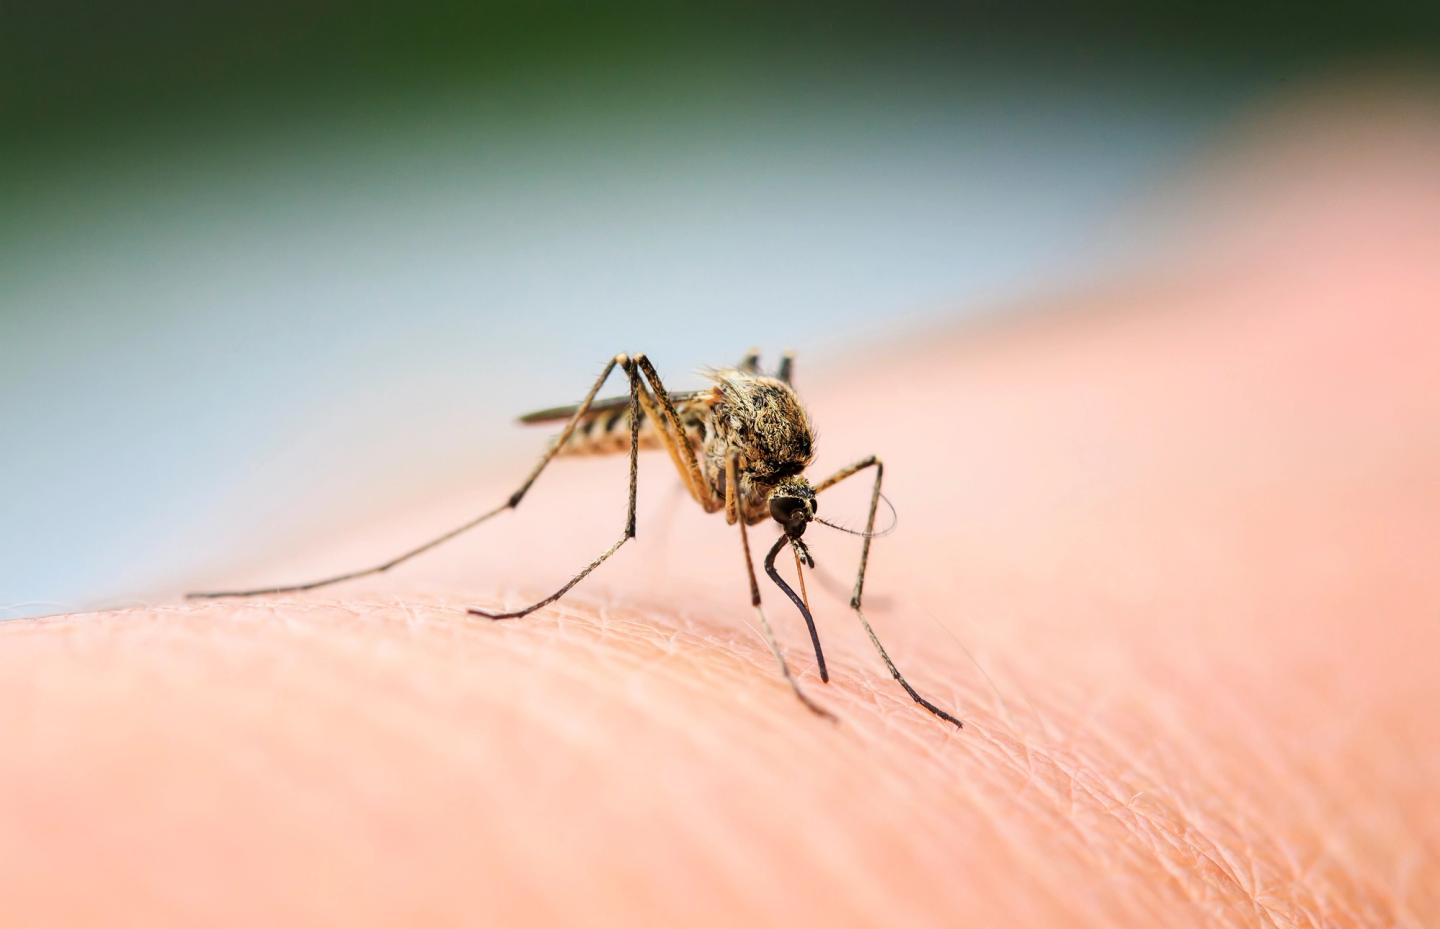 mosquito sitting on her hand drinking blood